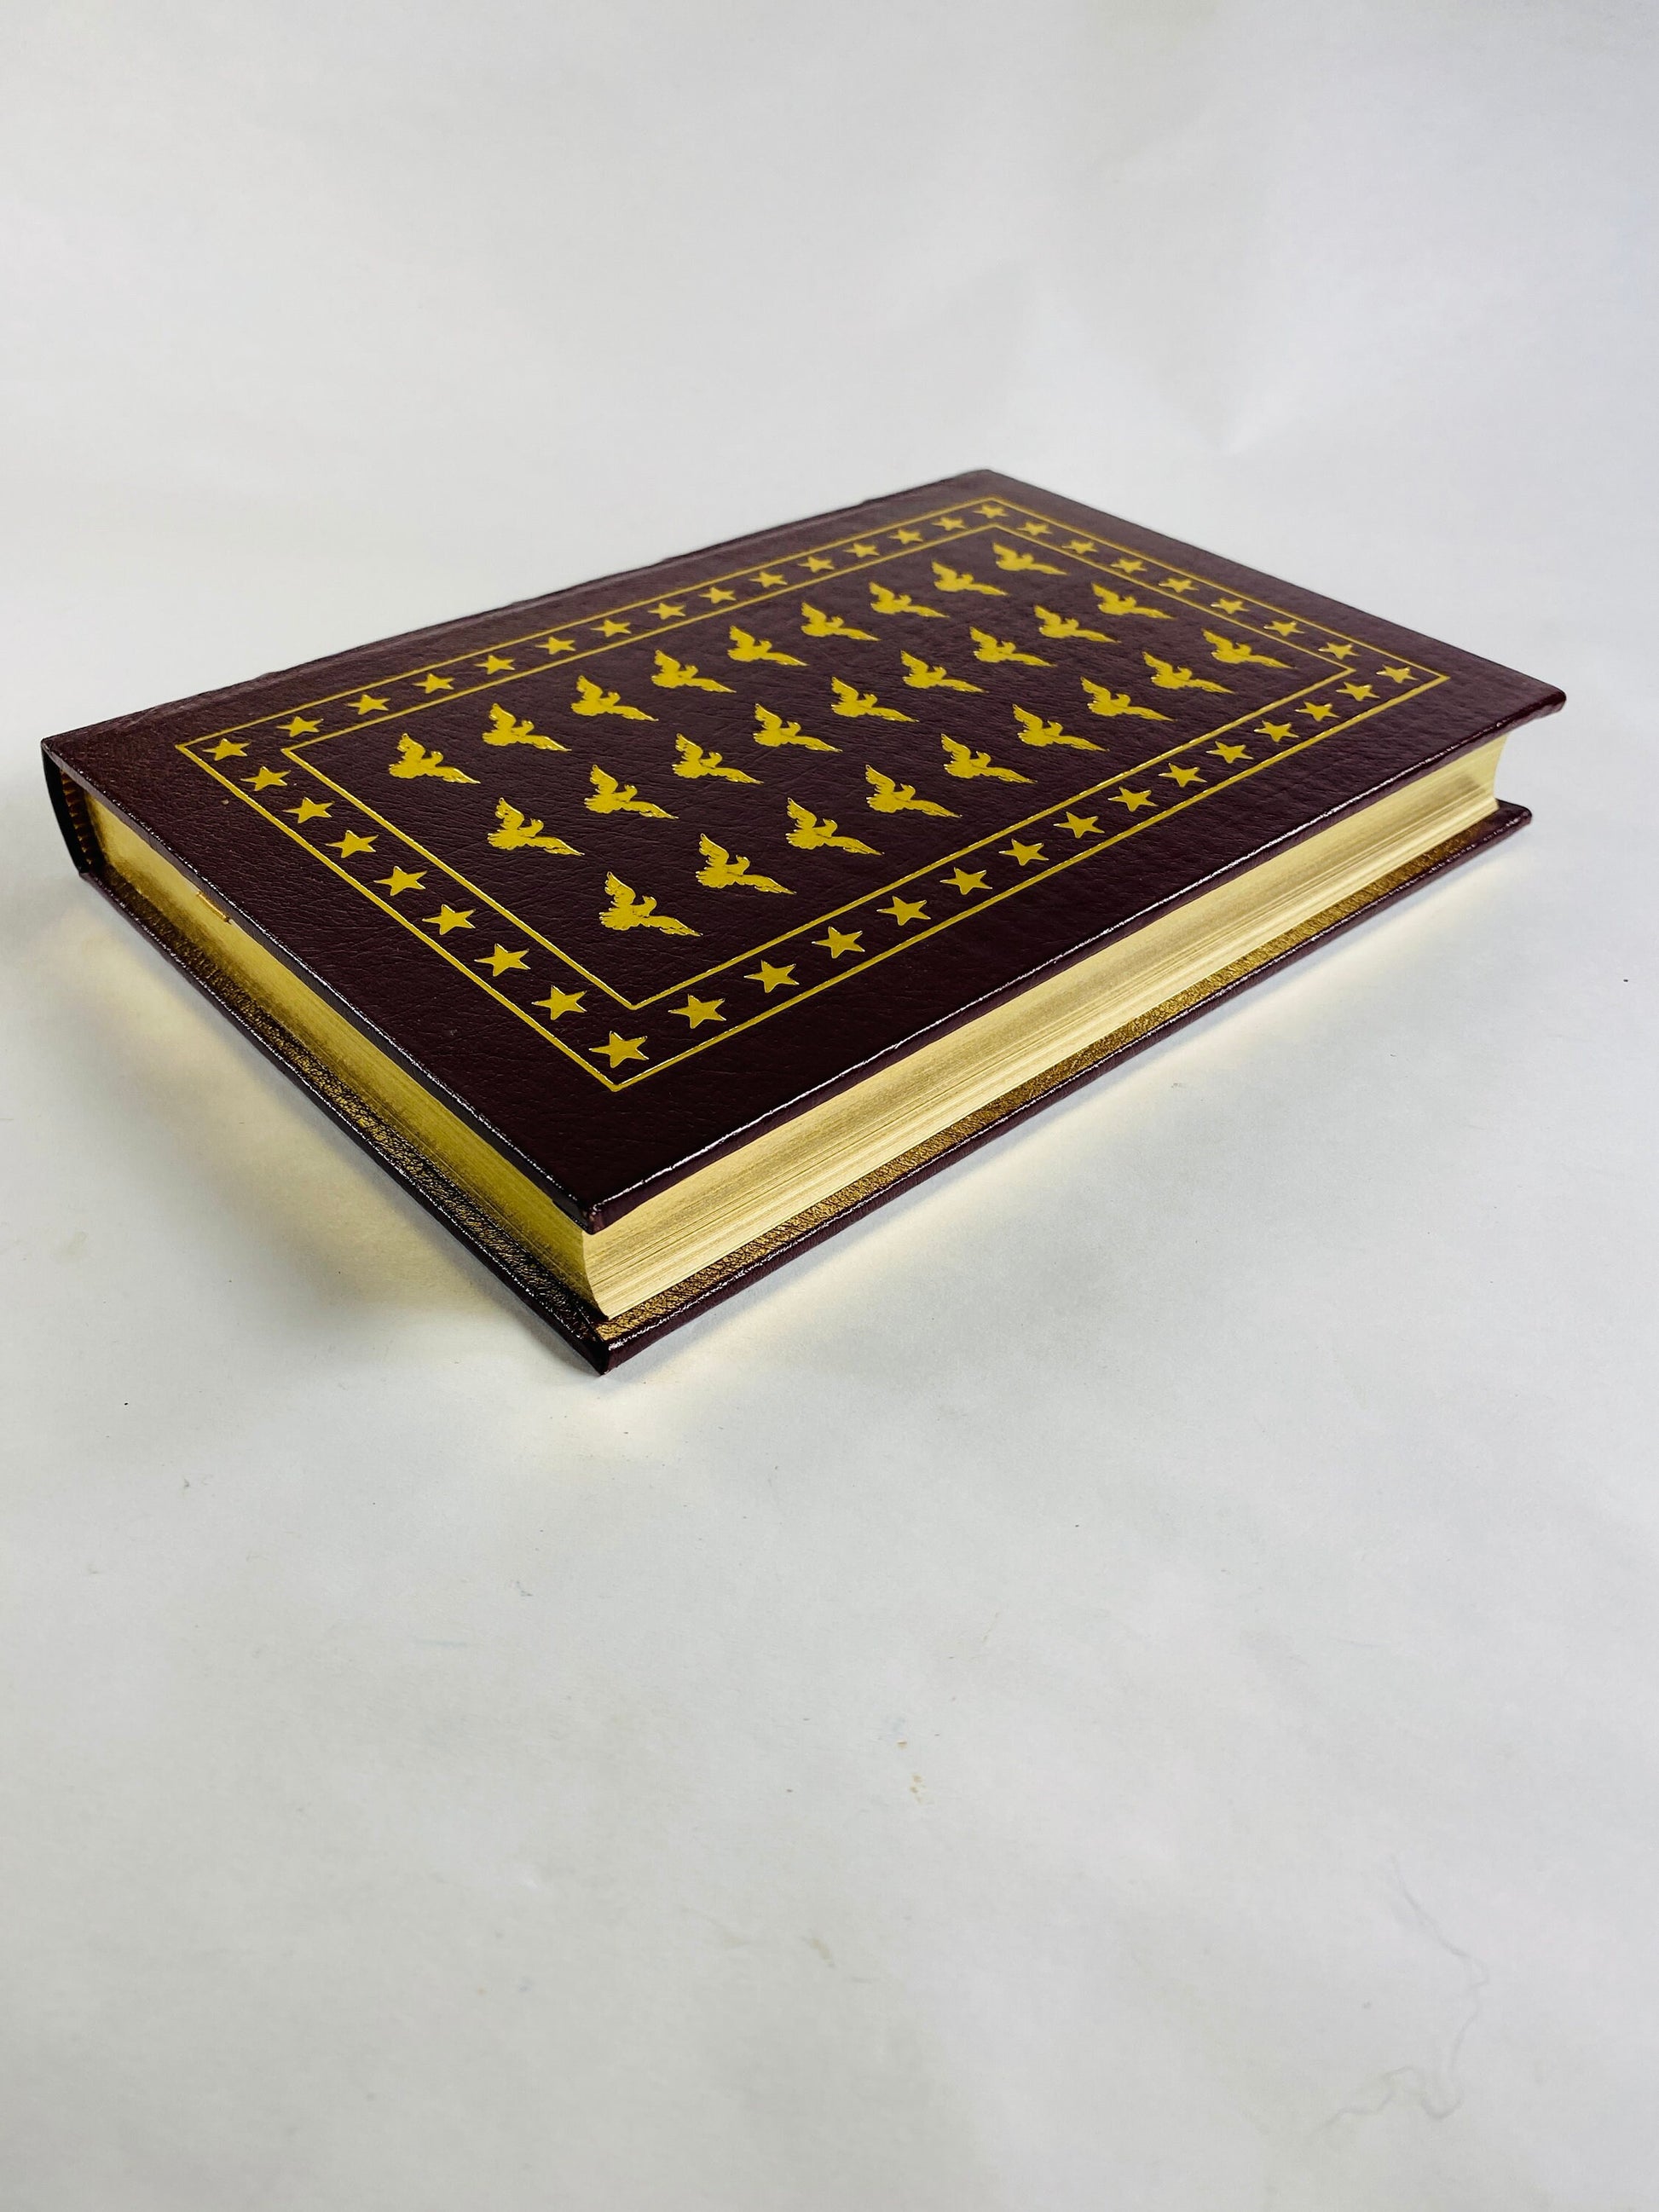 Burden and the Glory by John F Kennedy Vintage Easton Press book edited by Allan Nevins BEAUTIFUL maroon leather with gold gilt